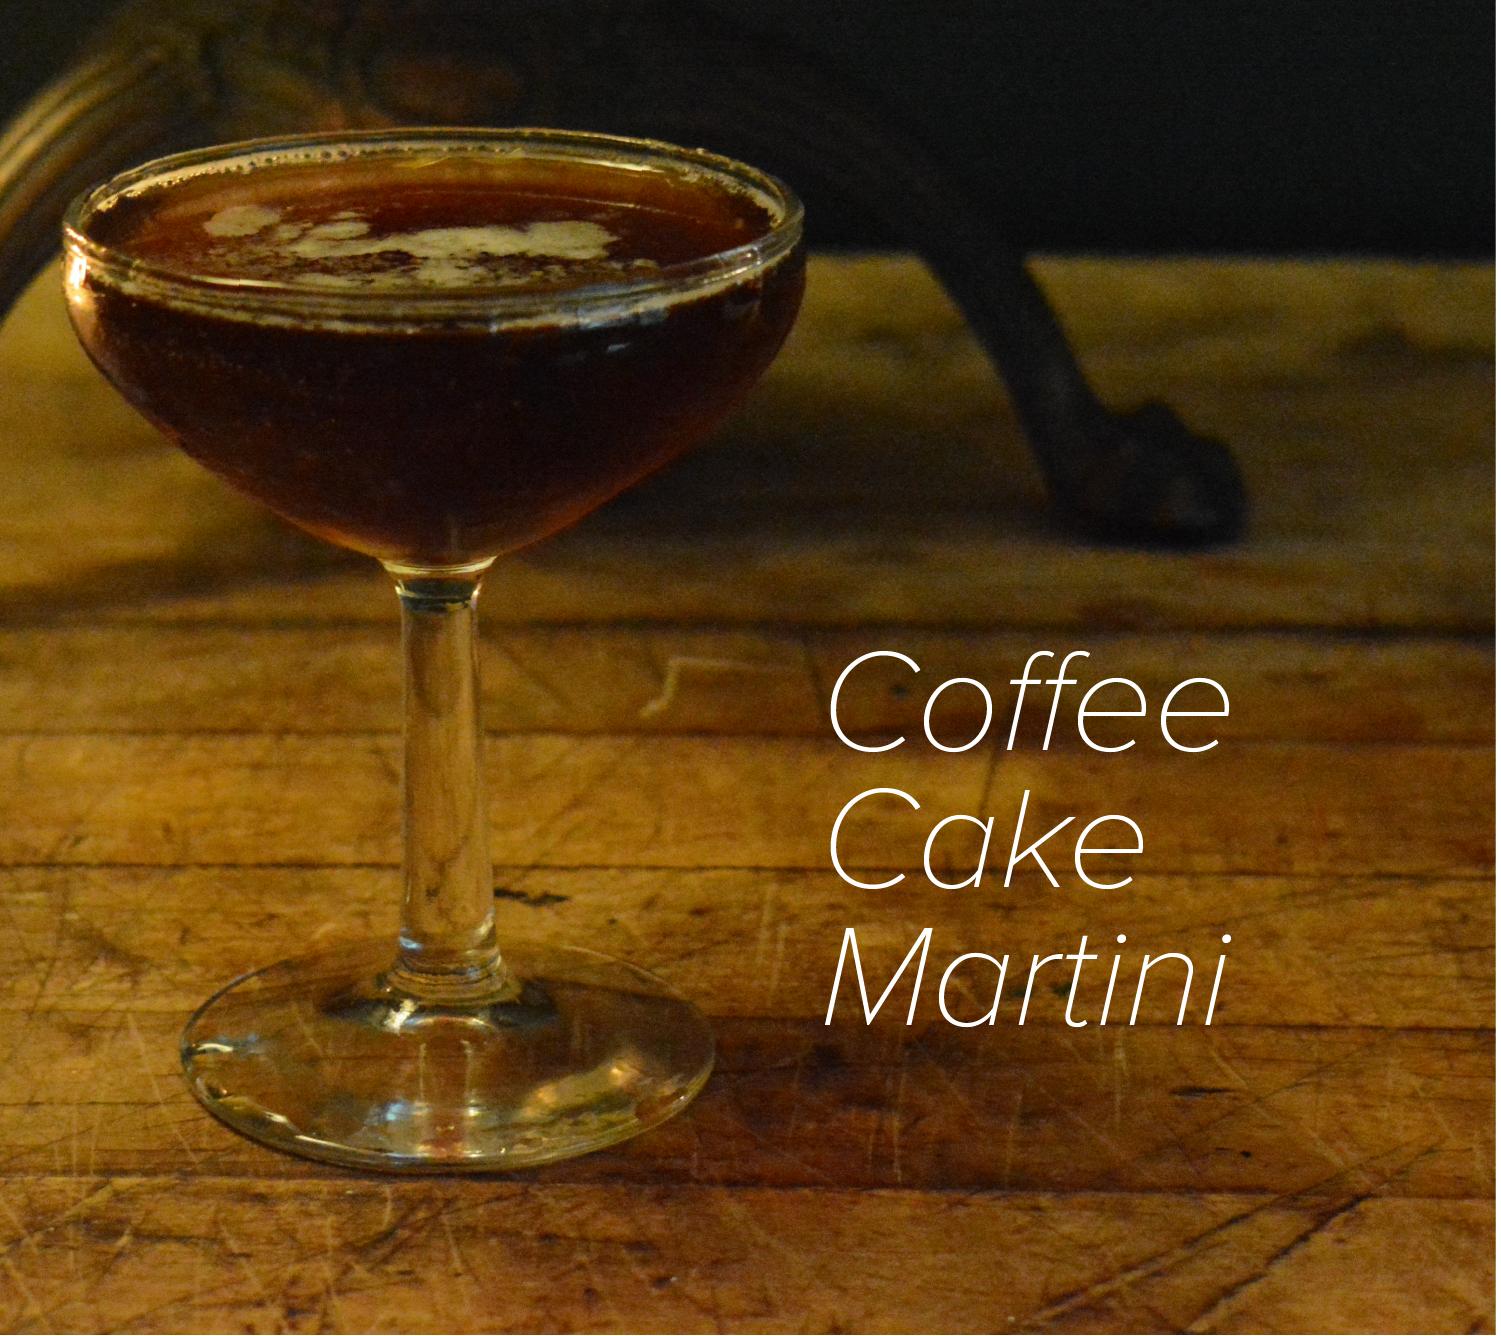  Say goodbye to boring cocktails and hello to this scrumptious Coffee Cake Martini.